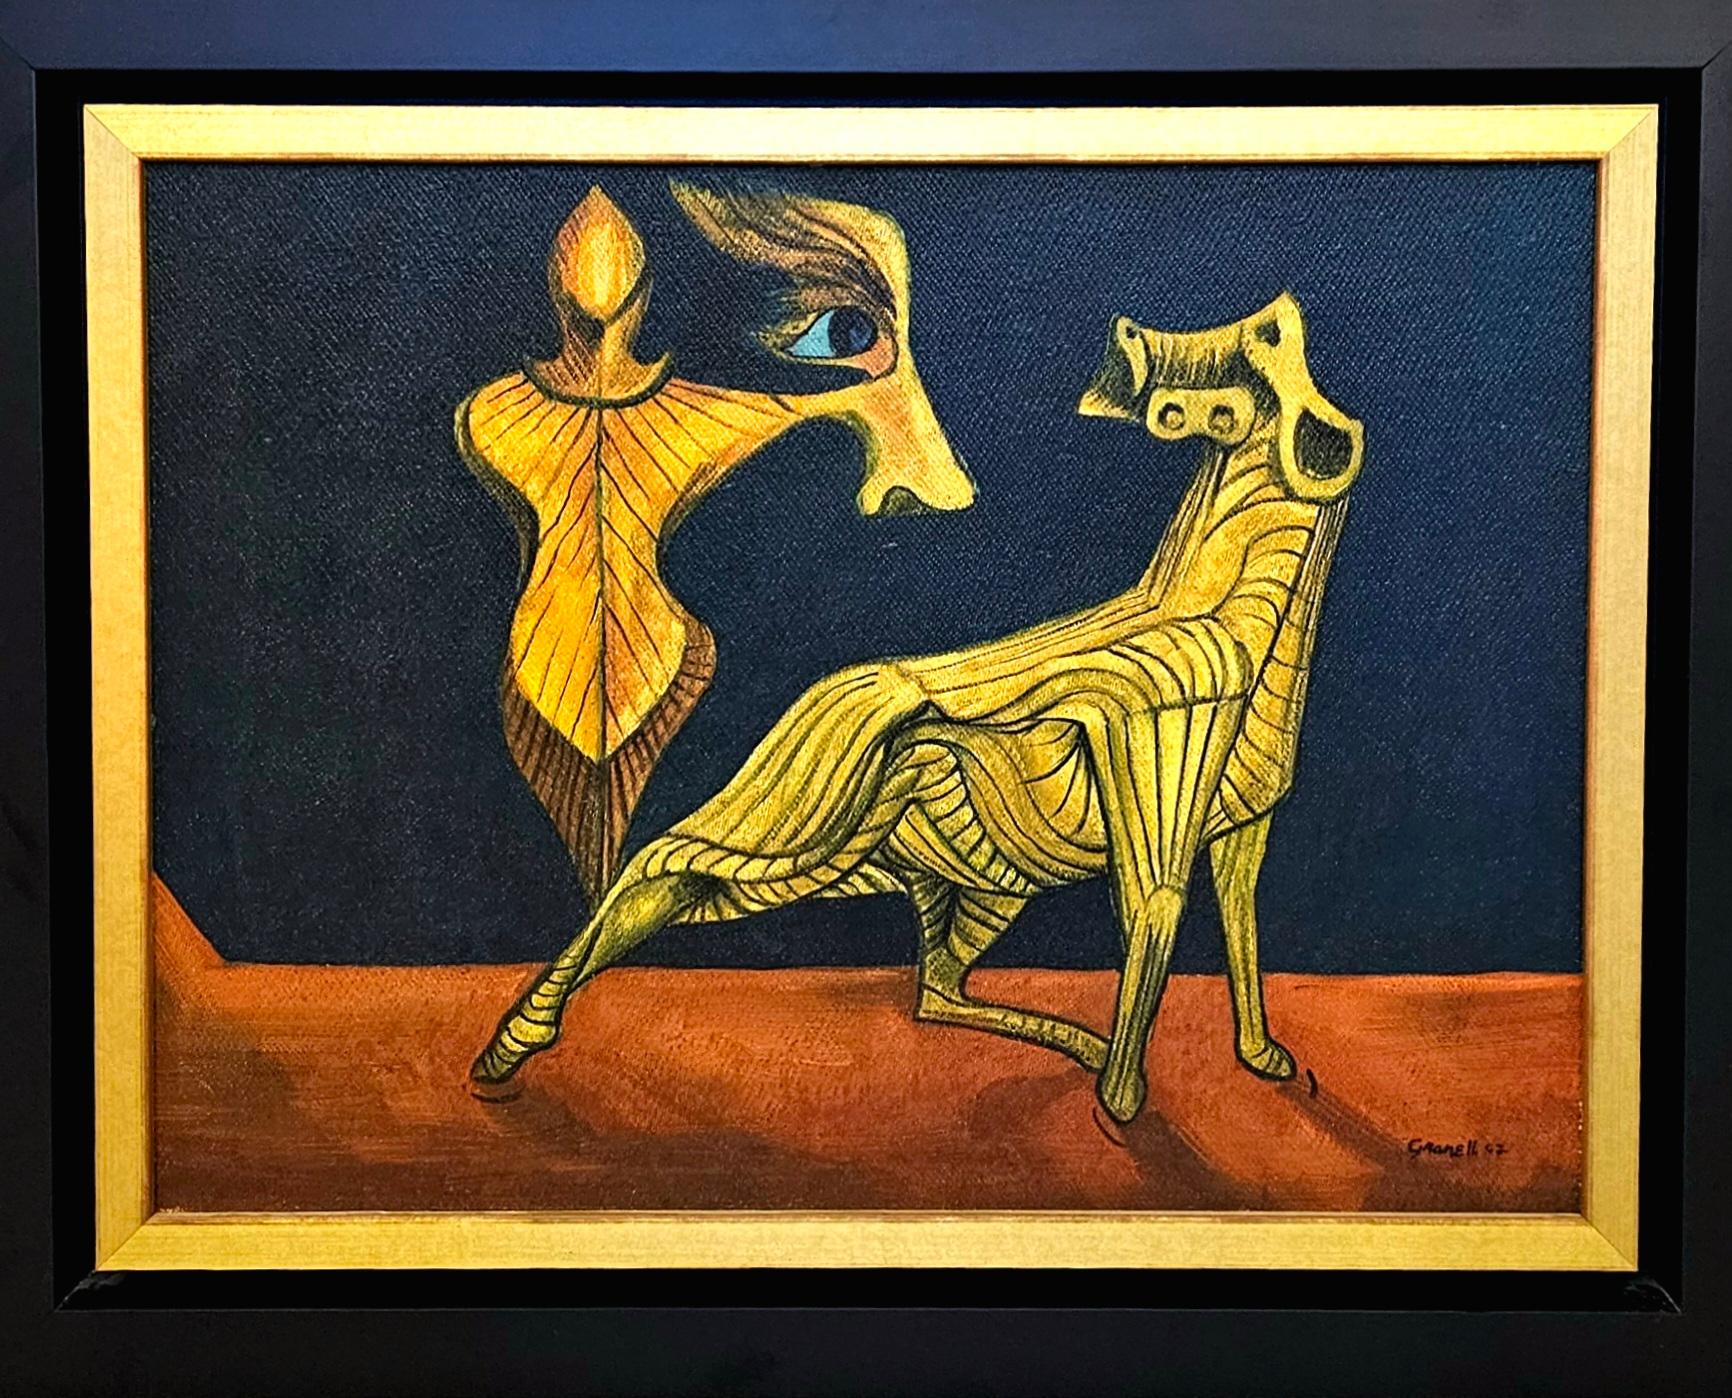 Oil on masonite by Eugenio Fernandez Granell (1912-2001).

Fantastic piece of art, realized by the Spanish artist Eugenio Fernandez Granell, back in the 1952. This art-piece were realized during his living period in Puerto Rico, when he decided to